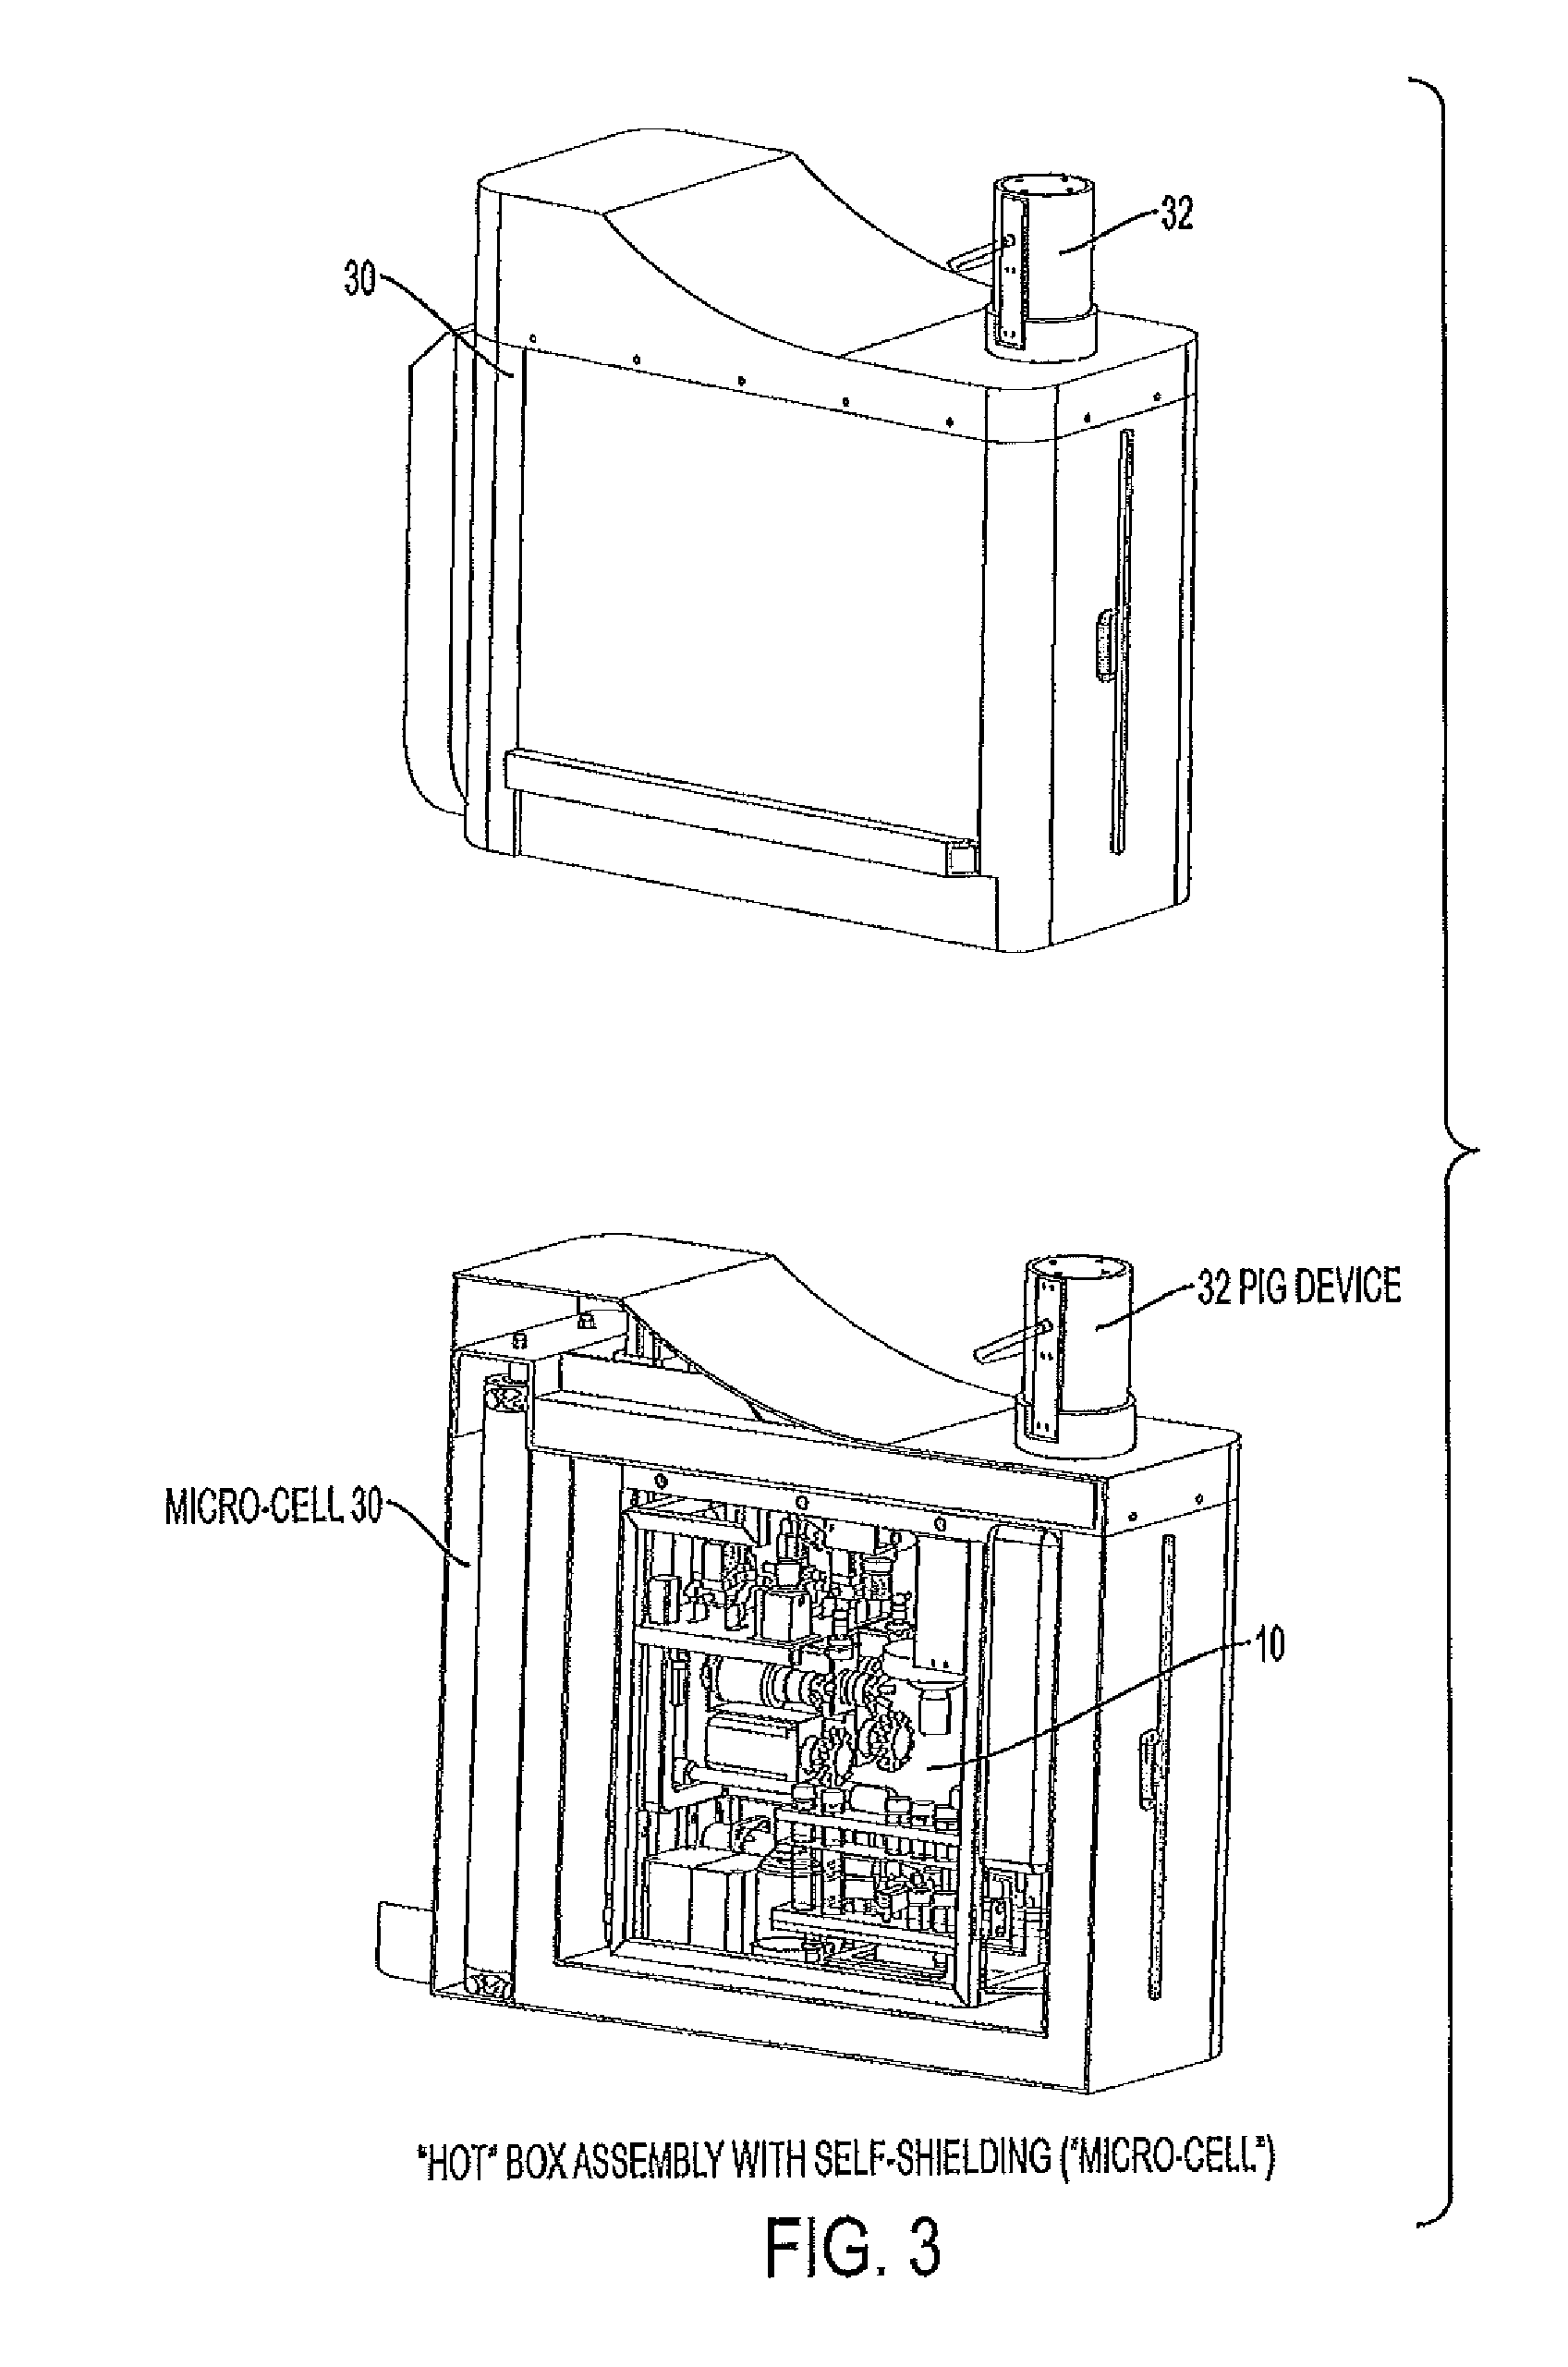 Modular System for Radiosynthesis with Multi-Run Capabilities and Reduced Risk of Radiation Exposure